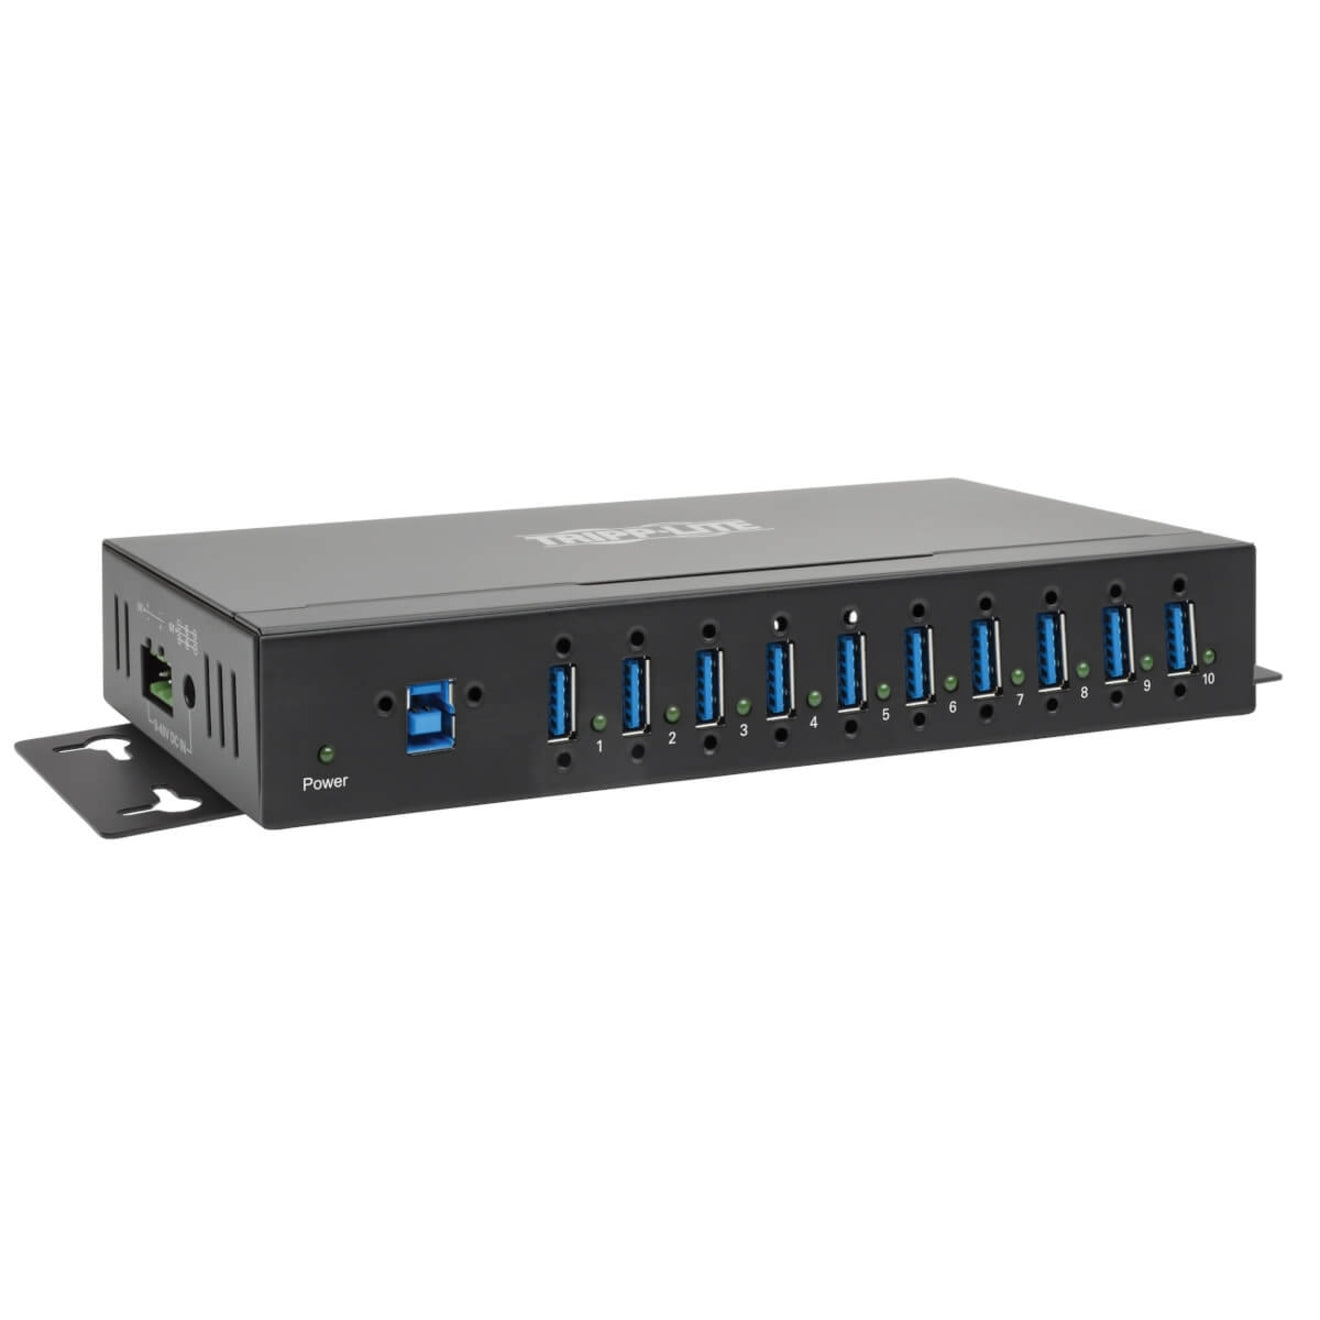 Tripp Lite U360-010-IND 10-Port Industrial-Grade USB 3.0 SuperSpeed Hub, Rugged and Reliable USB Hub for PC and Mac